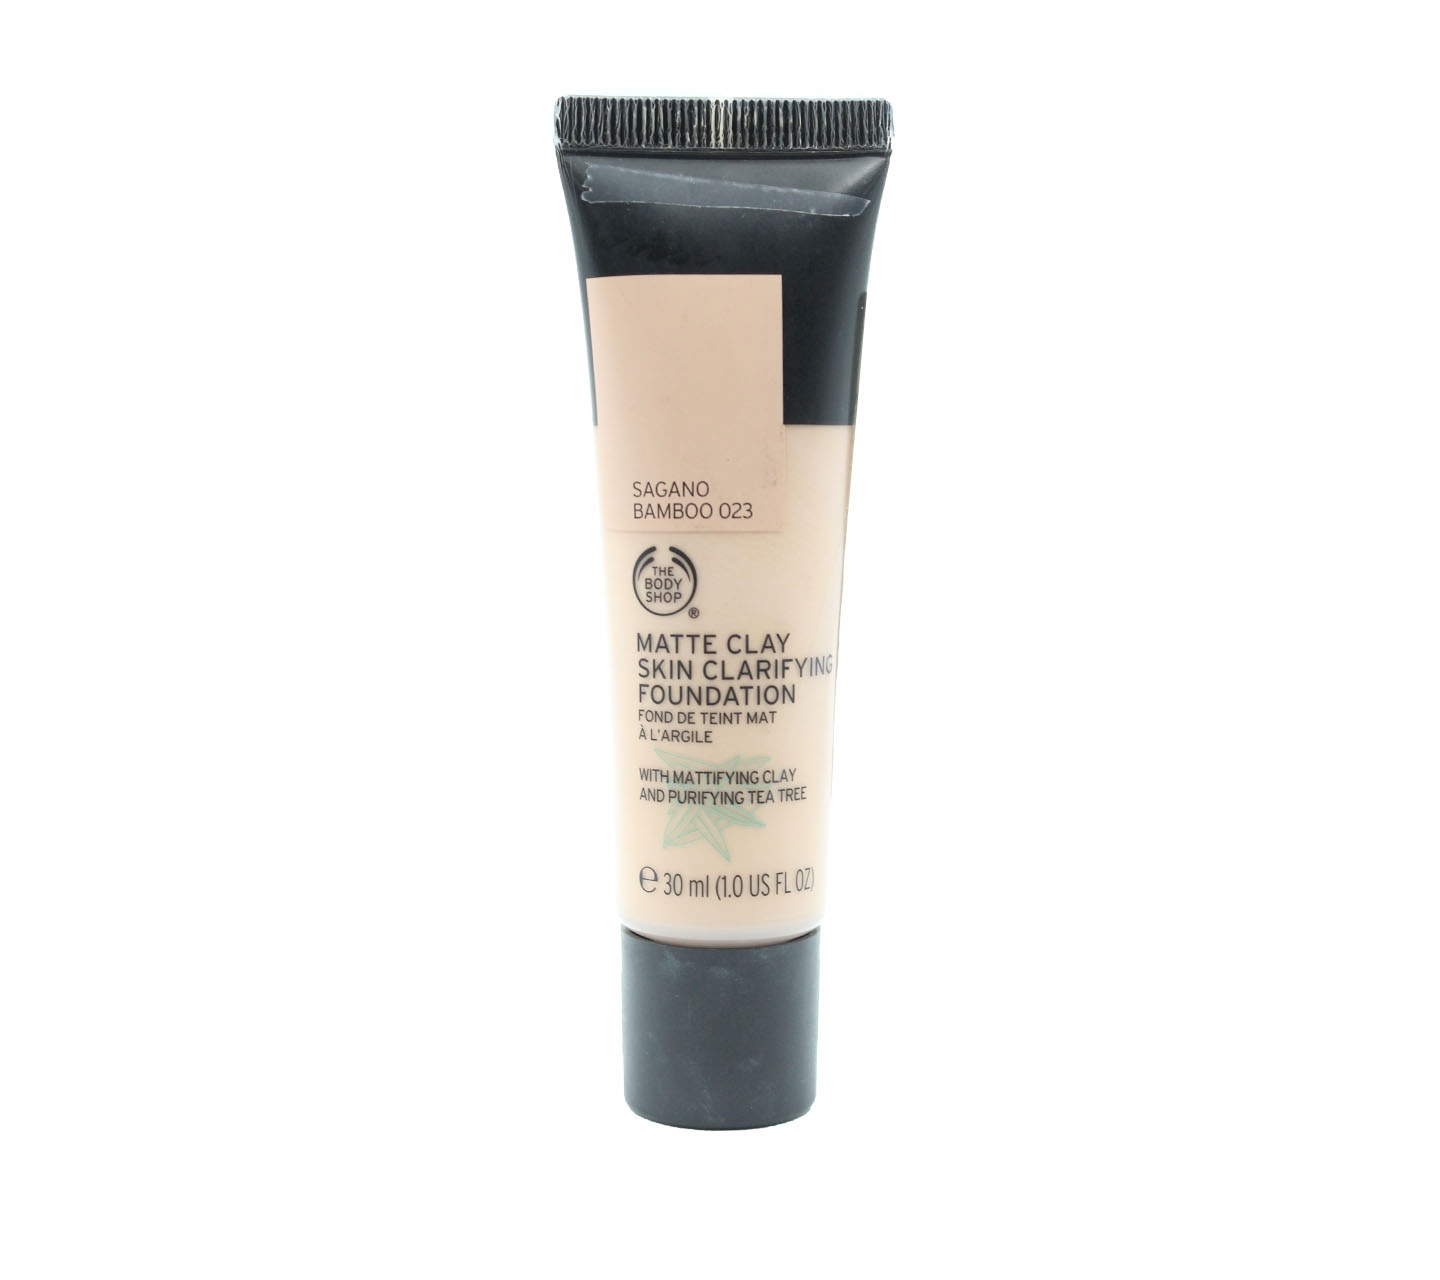 The Face Shop Matte Clay Skin Clarifying Foundation